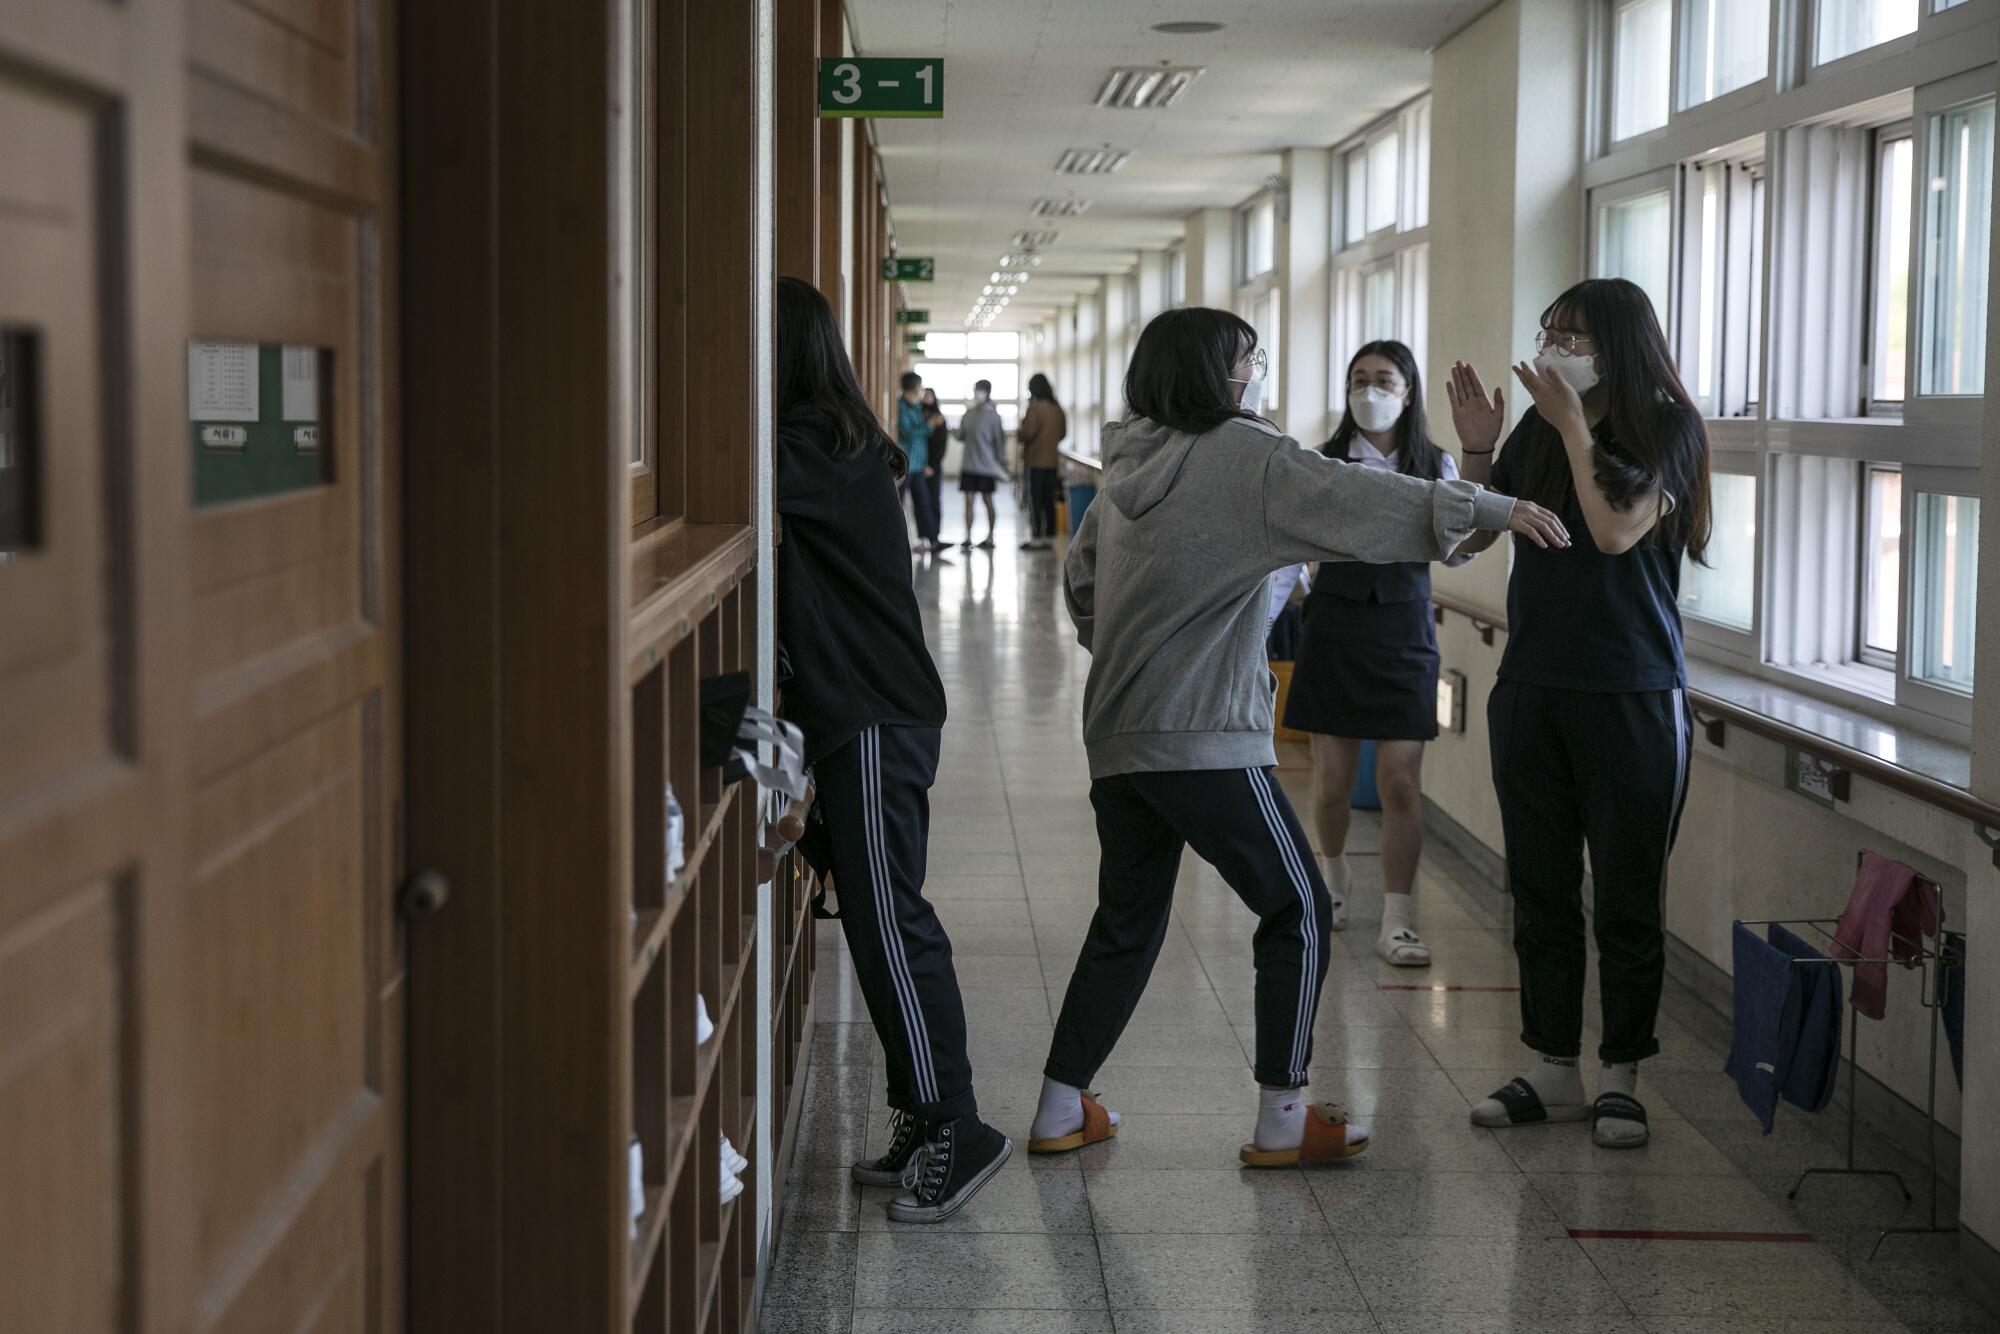 Students at Gyungbuk Girls' High School chat during a break on their first day back in school in Daegu, the city that was at the center of South Korea's coronavirus outbreak.